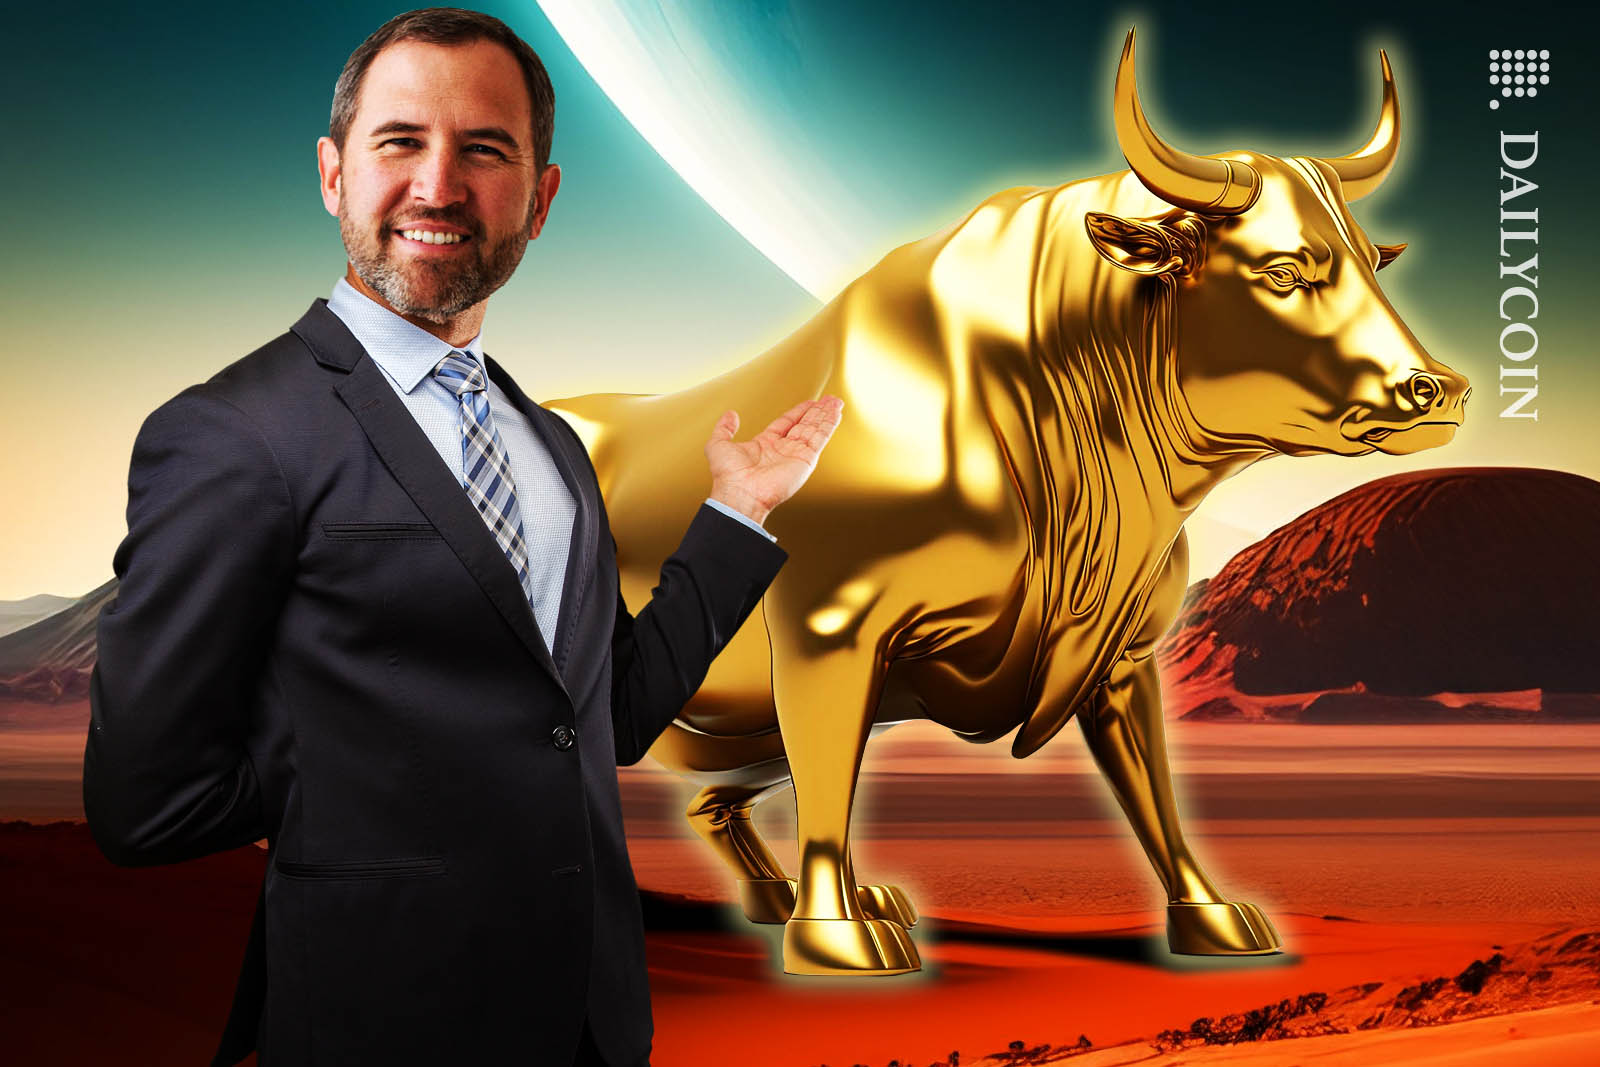 Bred Garlinghouse proudly presenting a giant of a golden bull statue in a red desert.